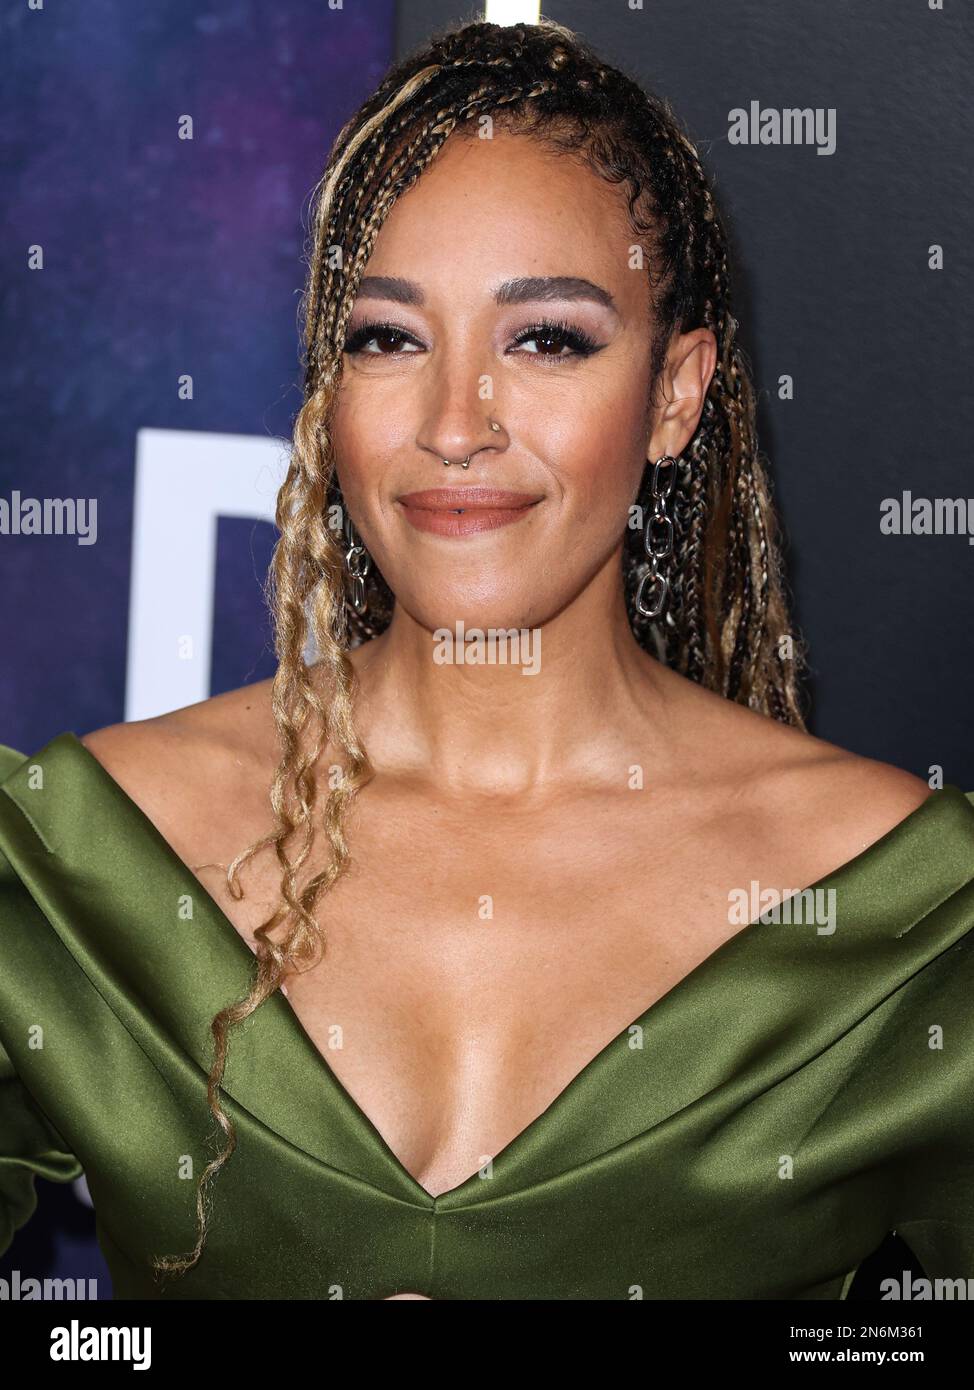 Hollywood, United States. 09th Feb, 2023. HOLLYWOOD, LOS ANGELES, CALIFORNIA, USA - FEBRUARY 09: American musician, comedian and actress Tawny Newsome arrives at the Los Angeles Premiere Of Paramount 's Original Series 'Star Trek: Picard' Third And Final Season held at the TCL Chinese Theatre IMAX on February 9, 2023 in Hollywood, Los Angeles, California, United States. (Photo by Xavier Collin/Image Press Agency) Credit: Image Press Agency/Alamy Live News Stock Photo